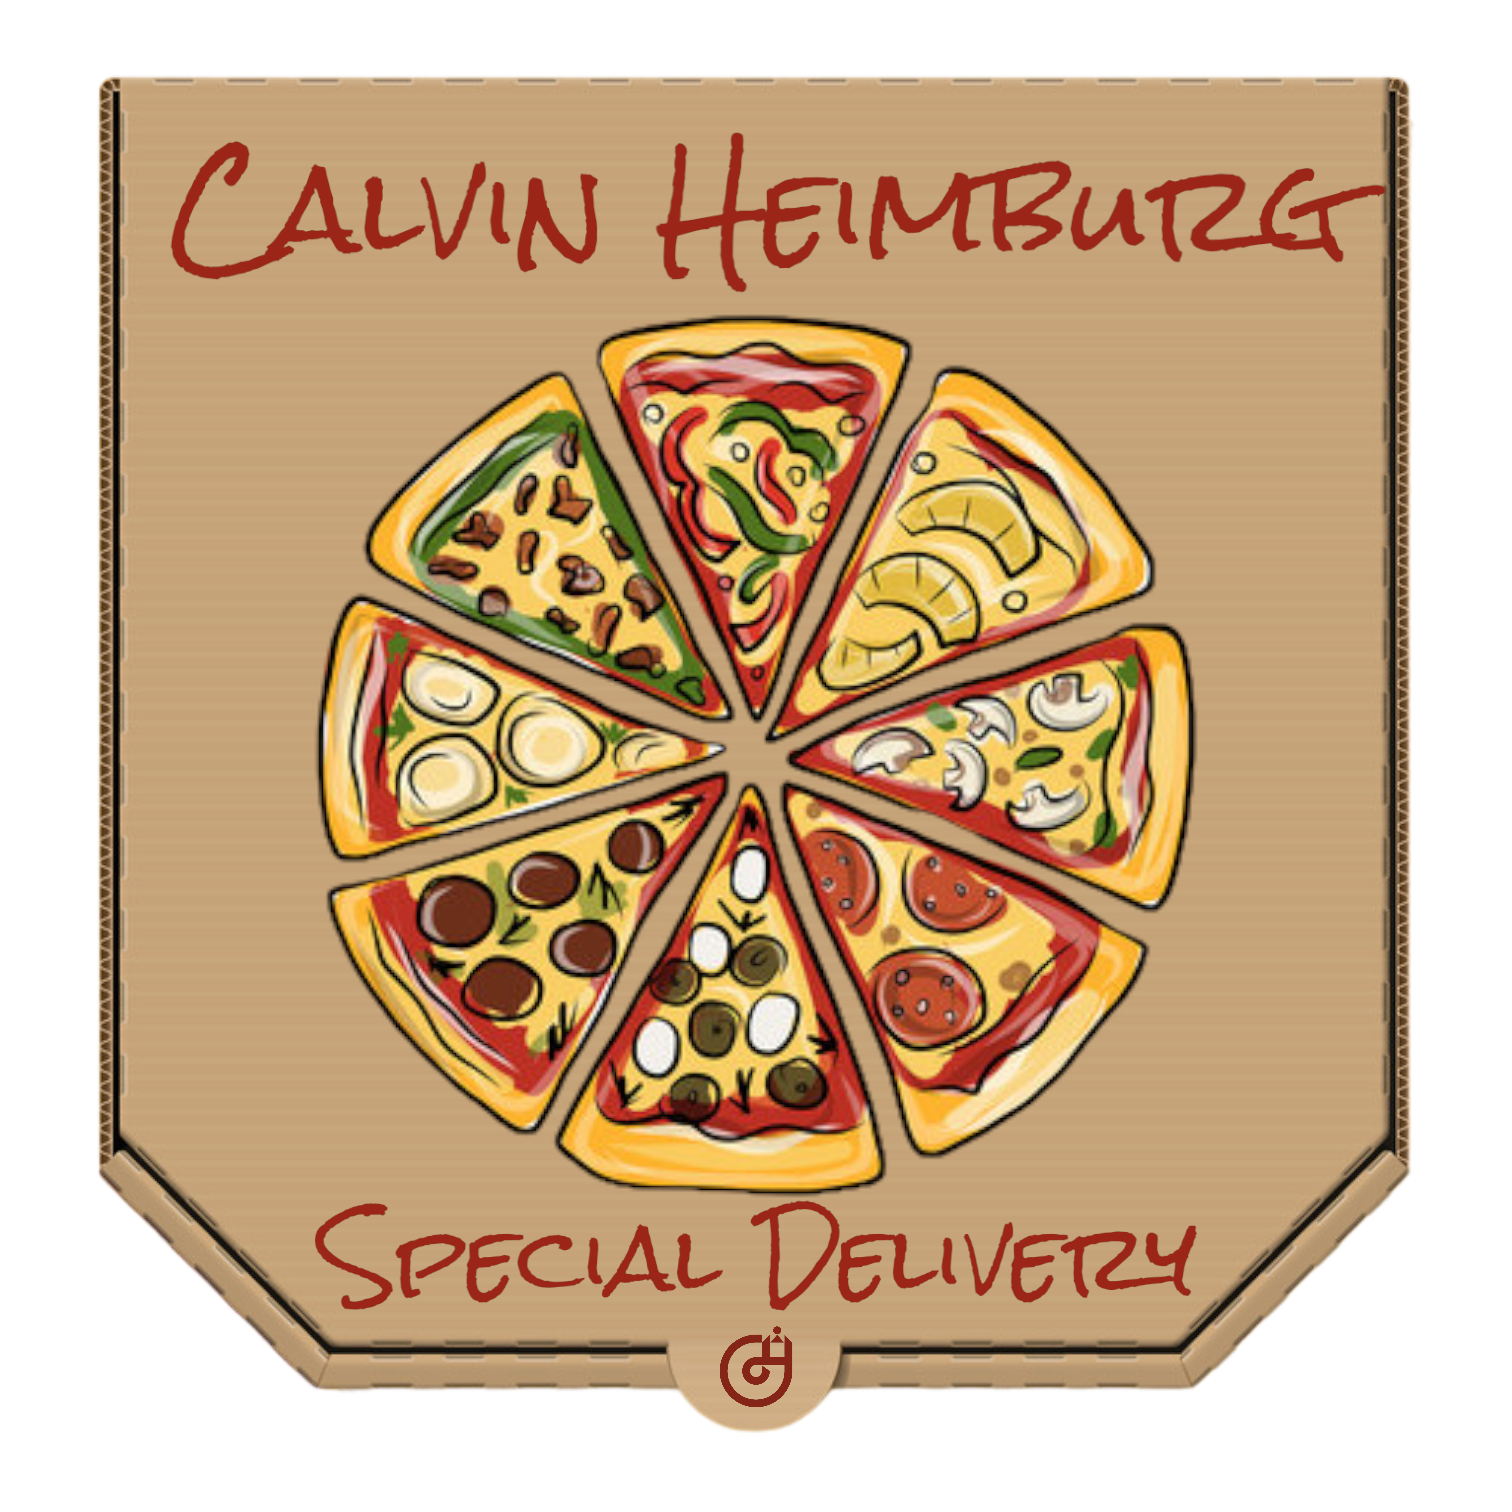 Calvin Heimburg Monthly Special Delivery Subscription Box